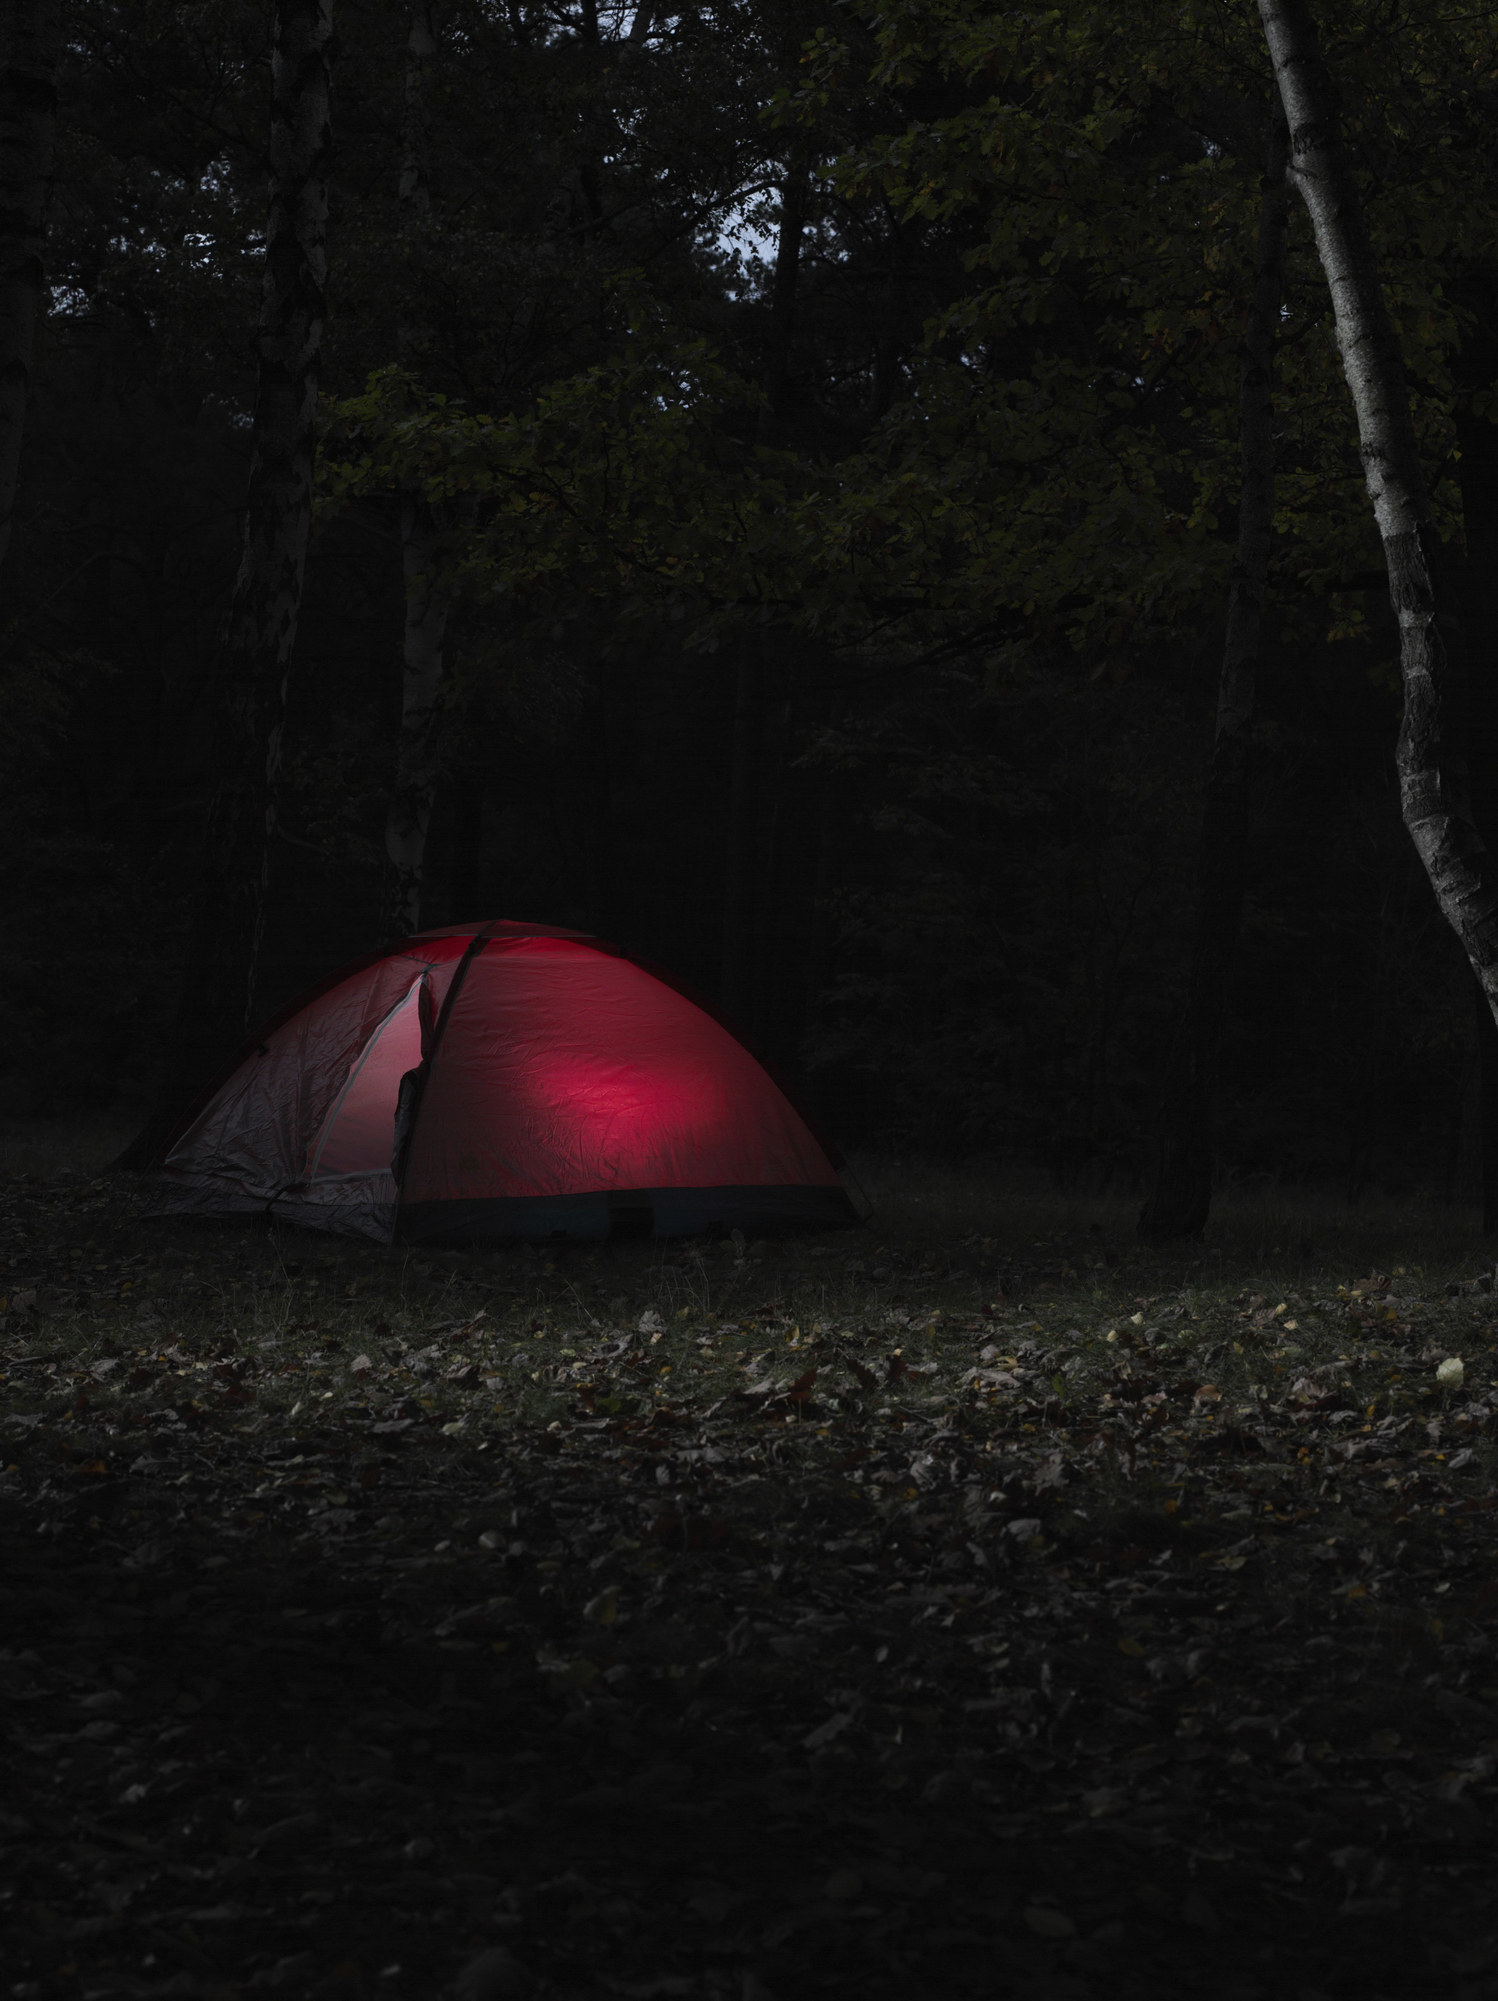 A tent glowing red with dim light sits by itself on a dark night